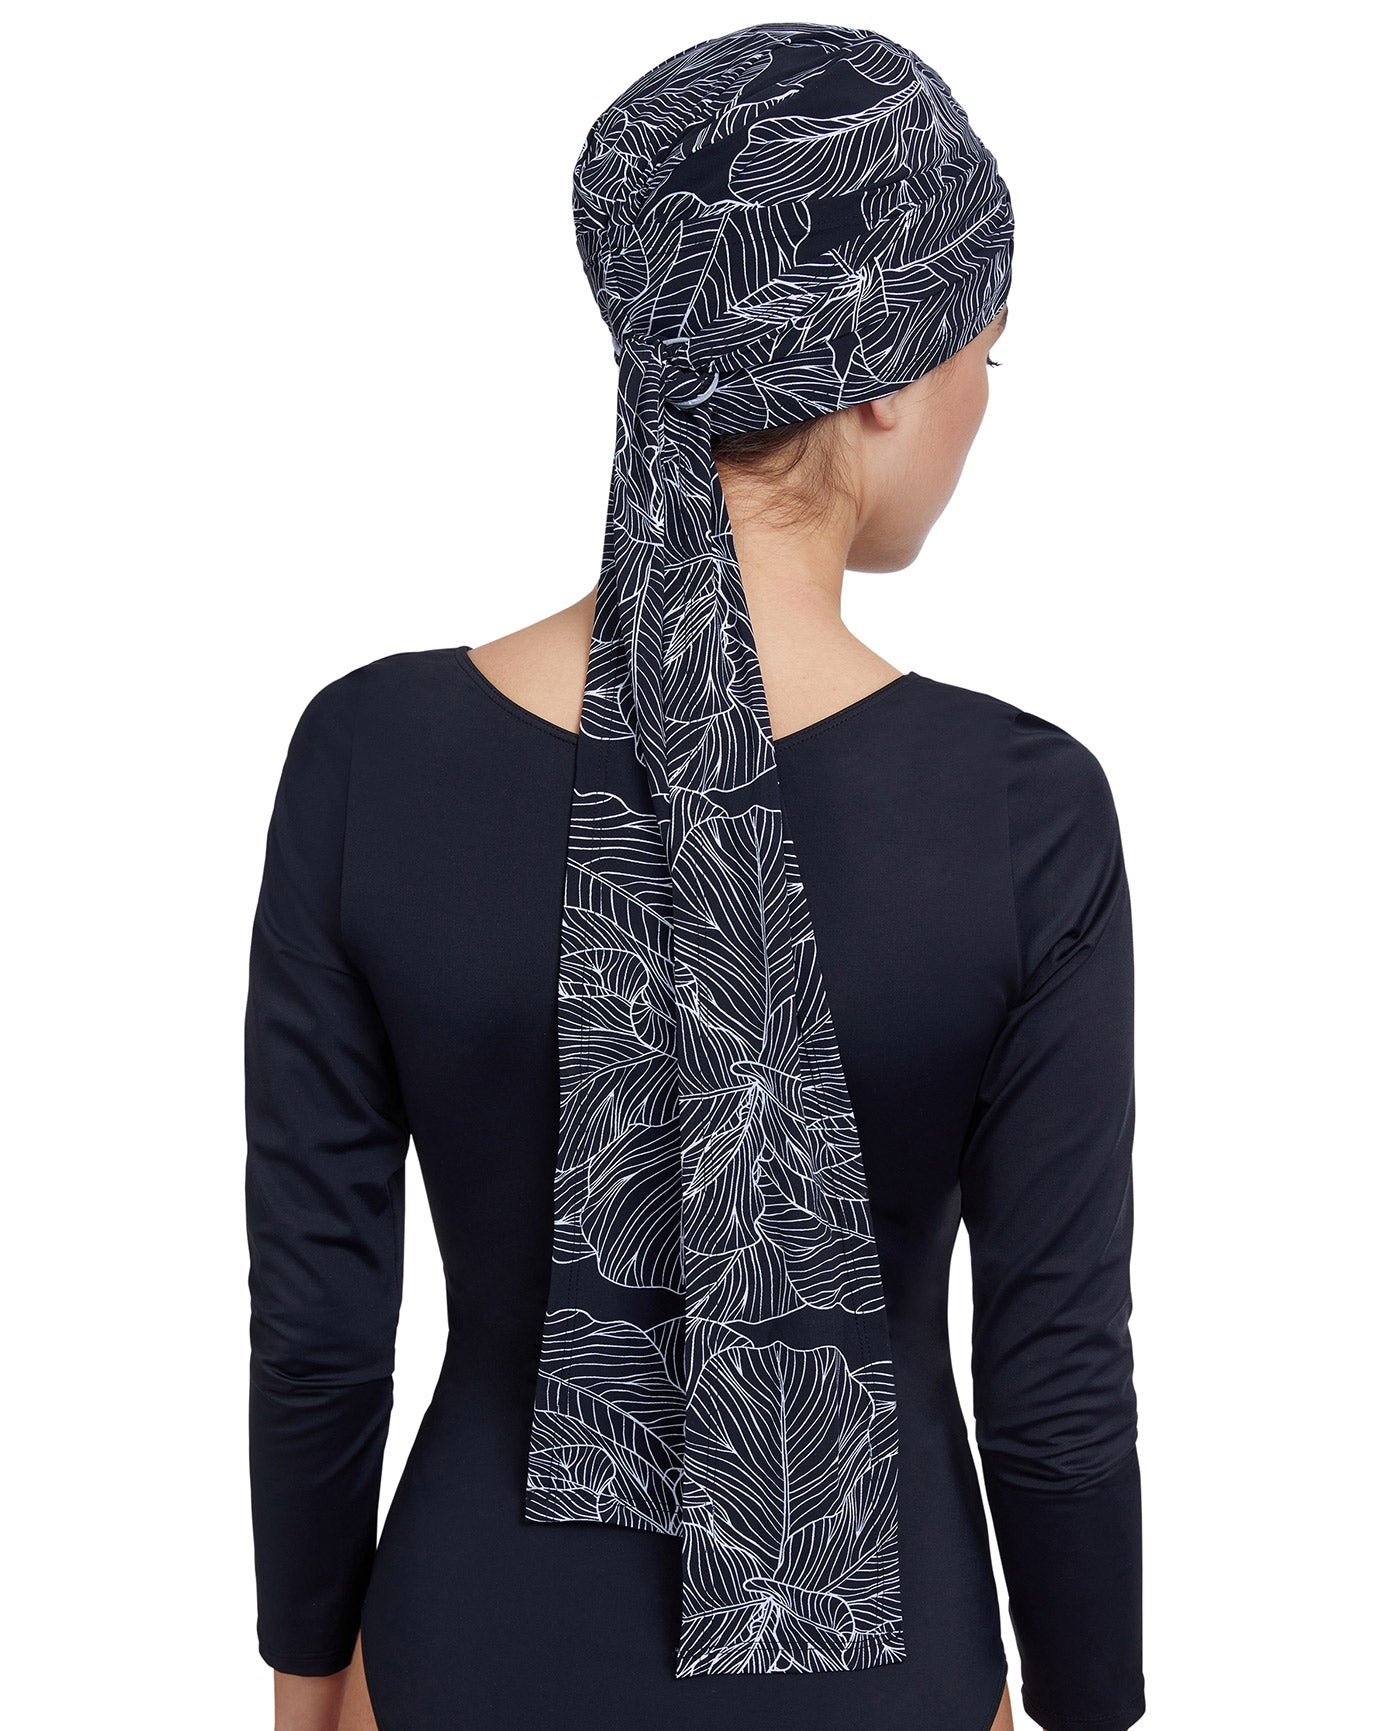 Back View Of Gottex Modest Hair Covering With Tie | GOTTEX MODEST BLACK AND WHITE LEAF